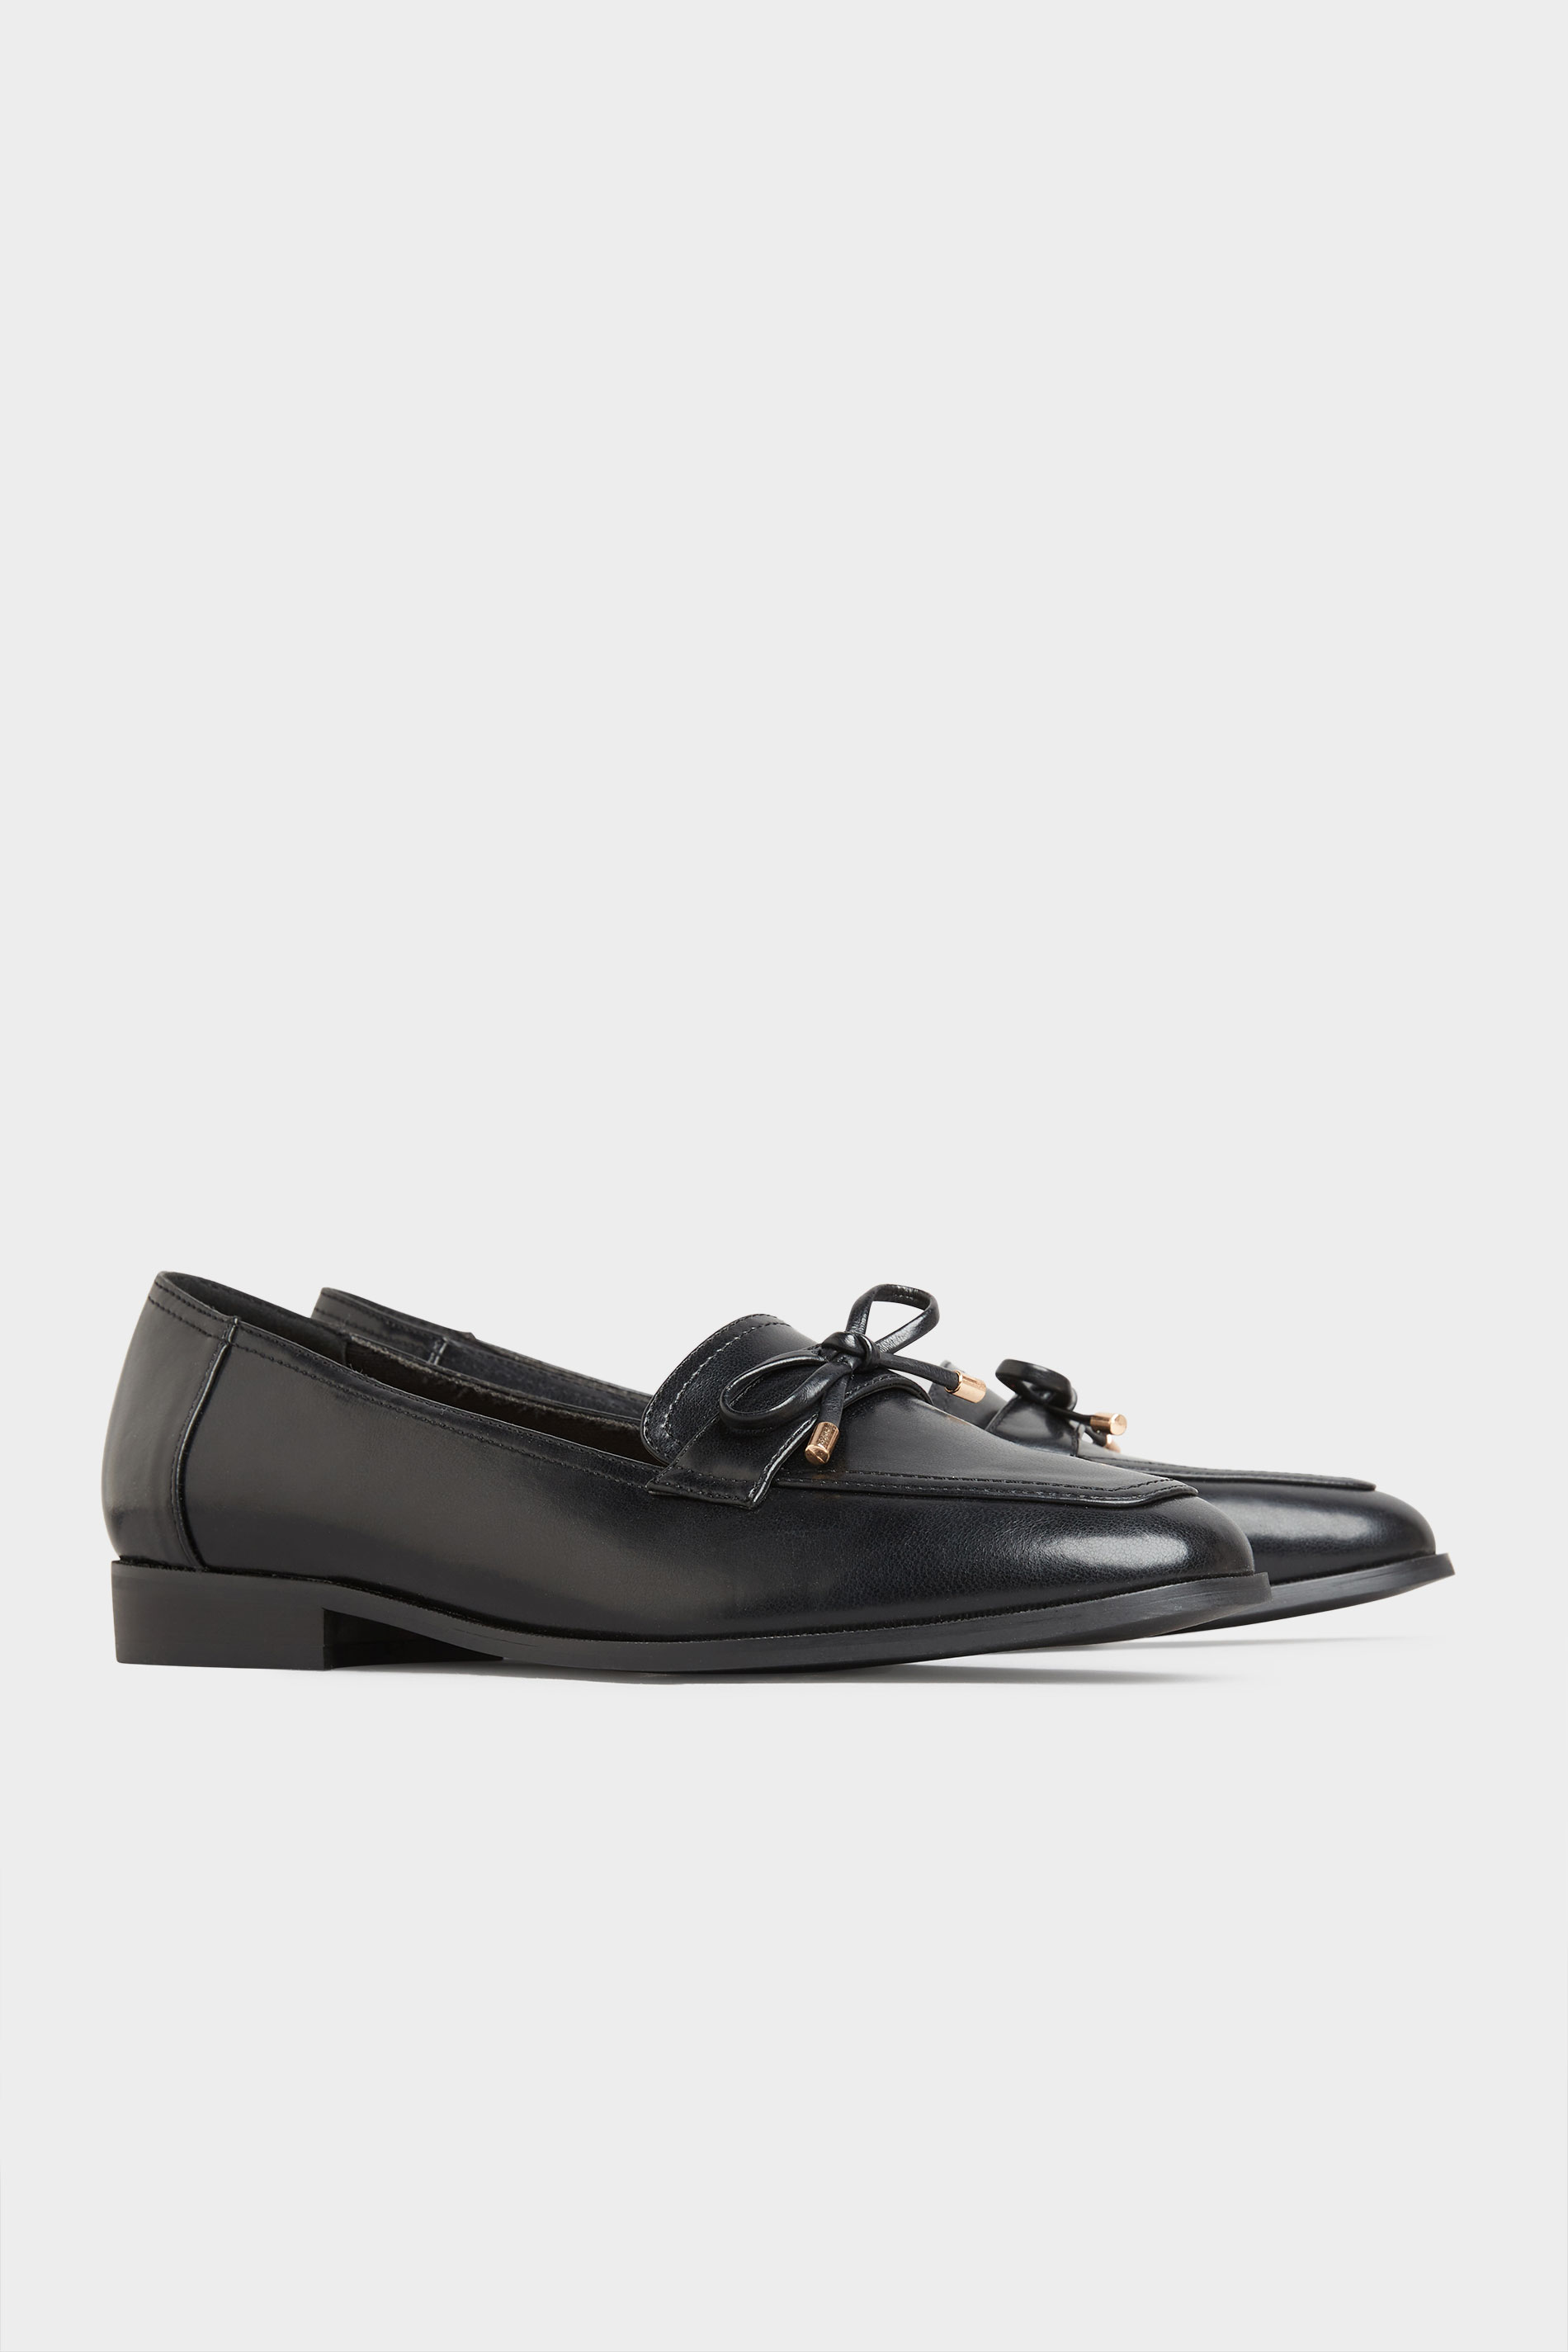 LTS Black Bow Trim Loafers In Standard D Fit 1